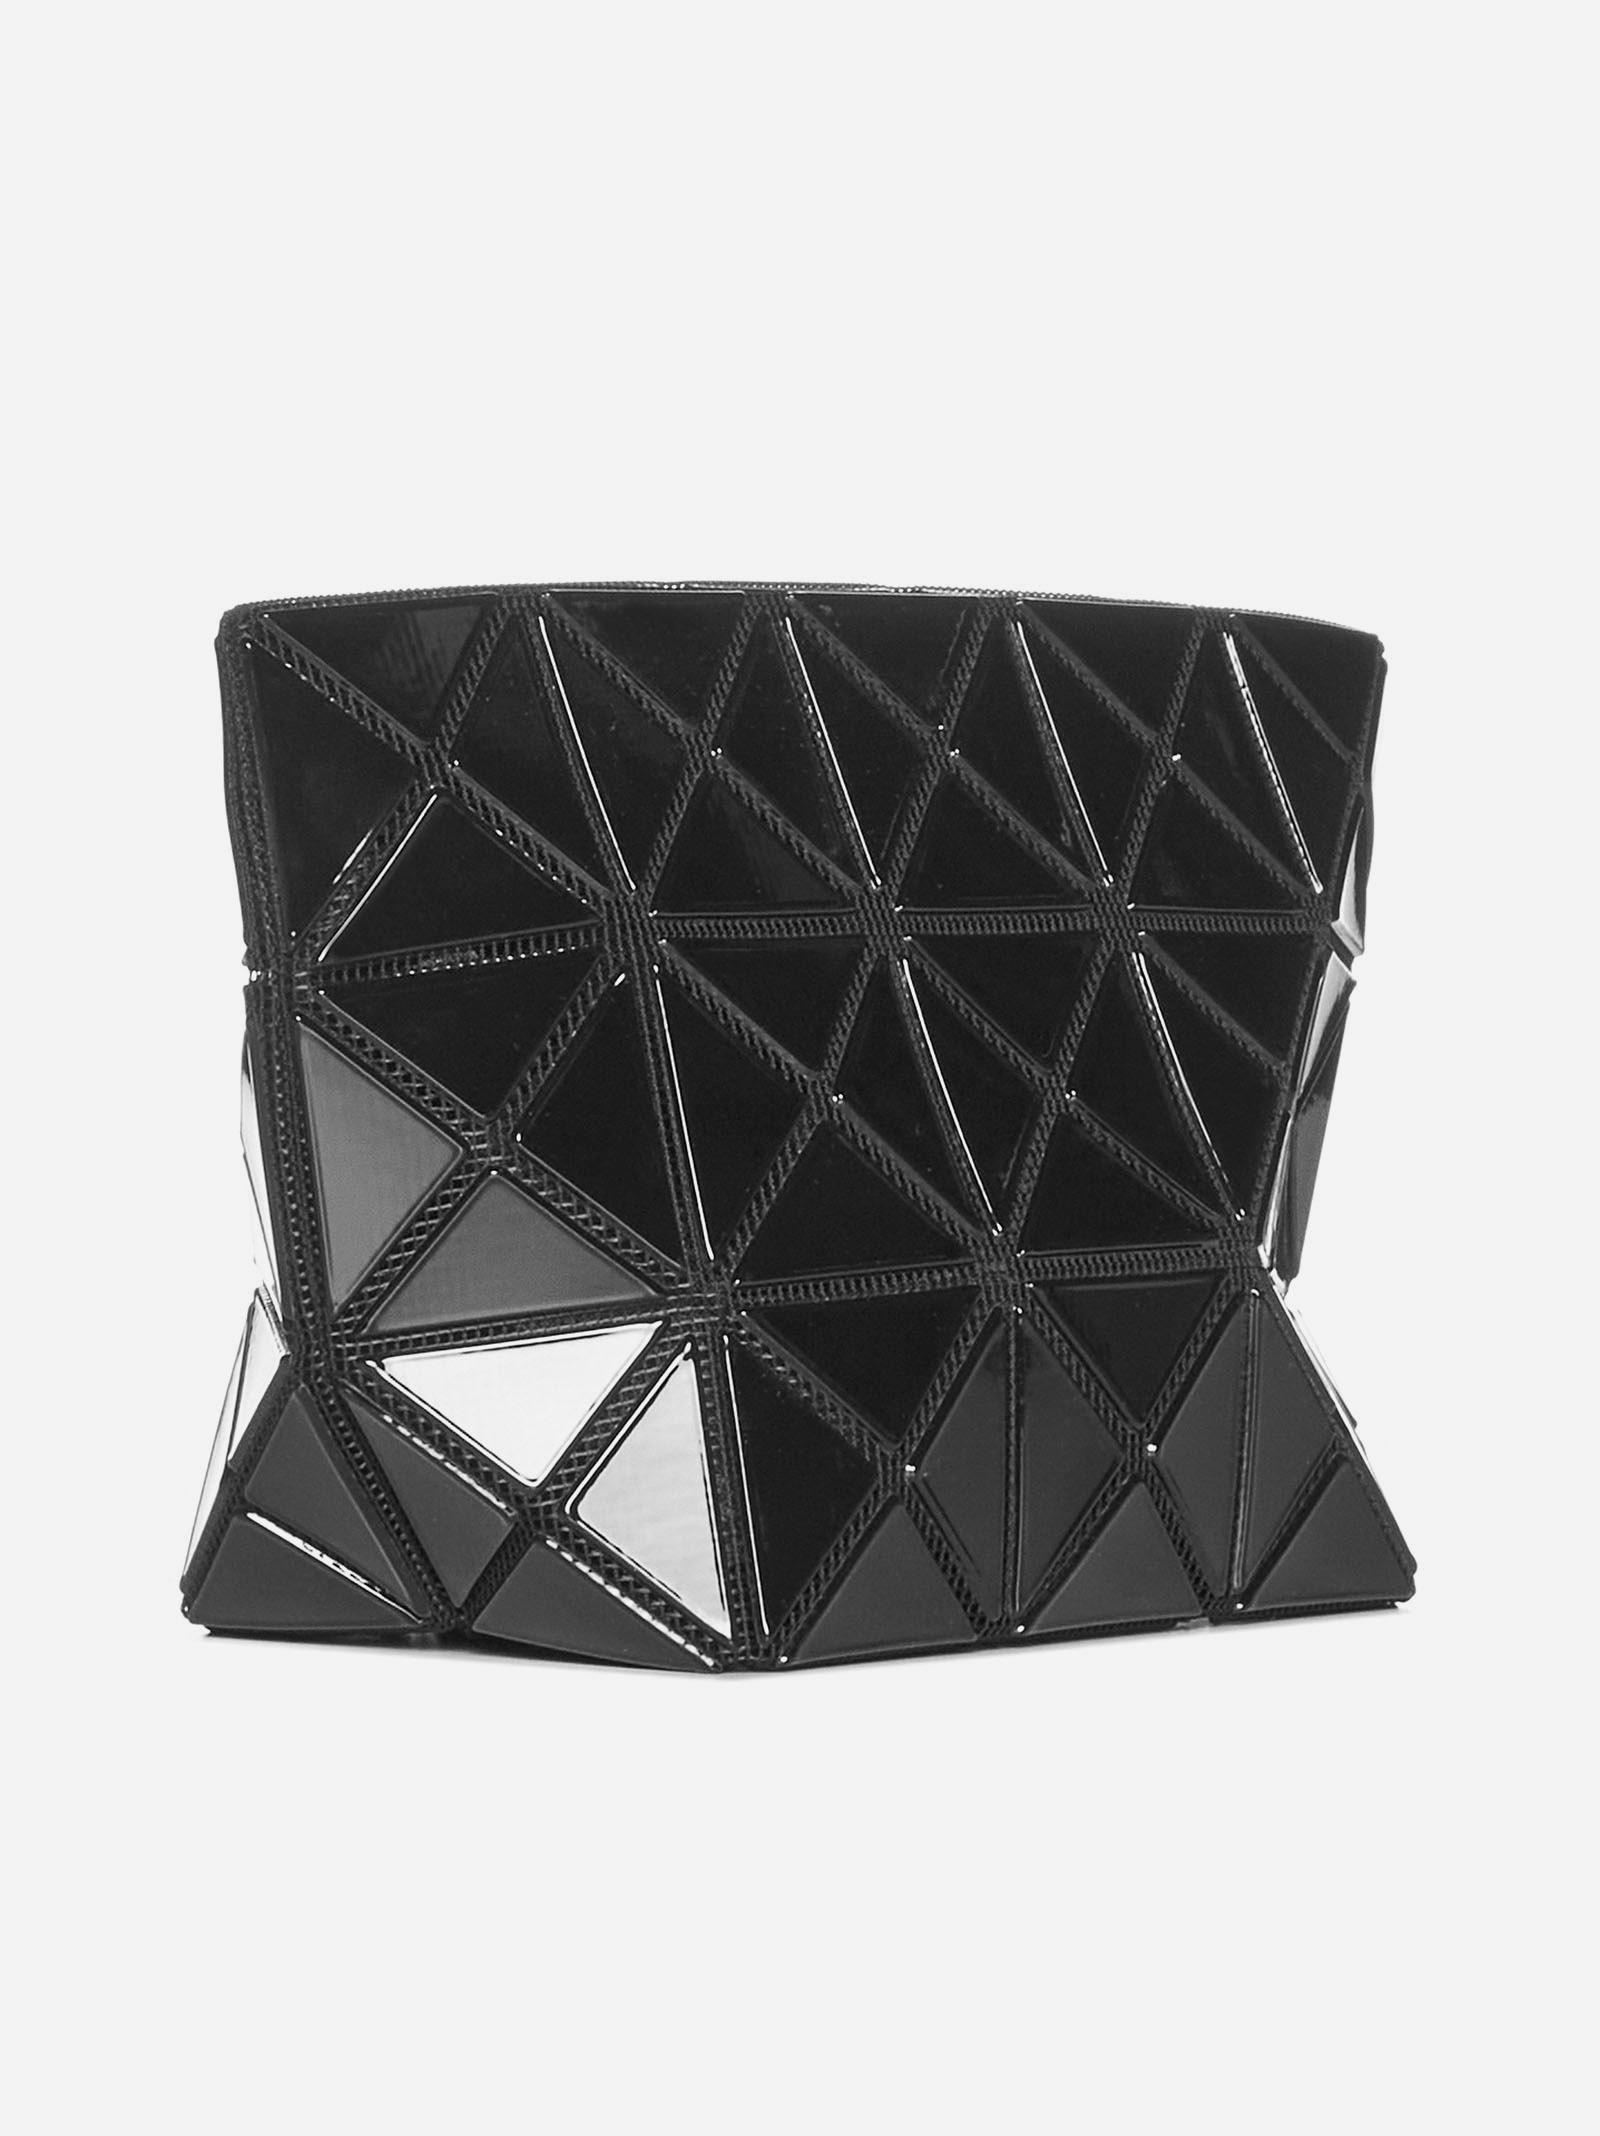 Bao Bao Issey Miyake Prism Pouch in Black | Lyst